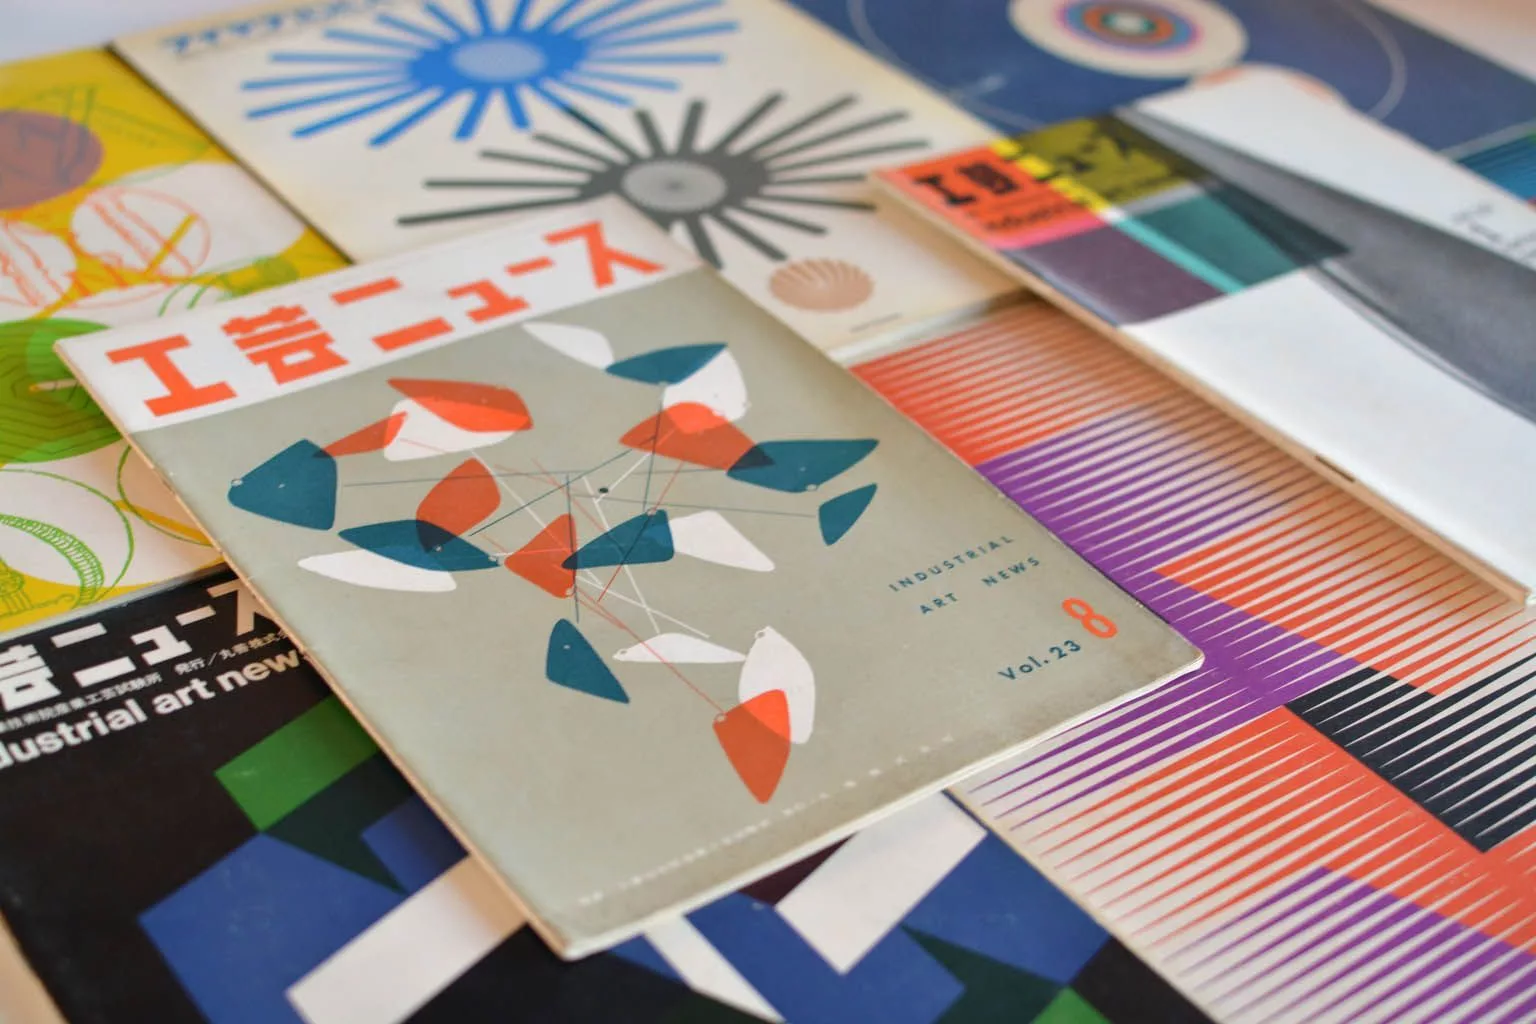 Graphic Design History Documented Online